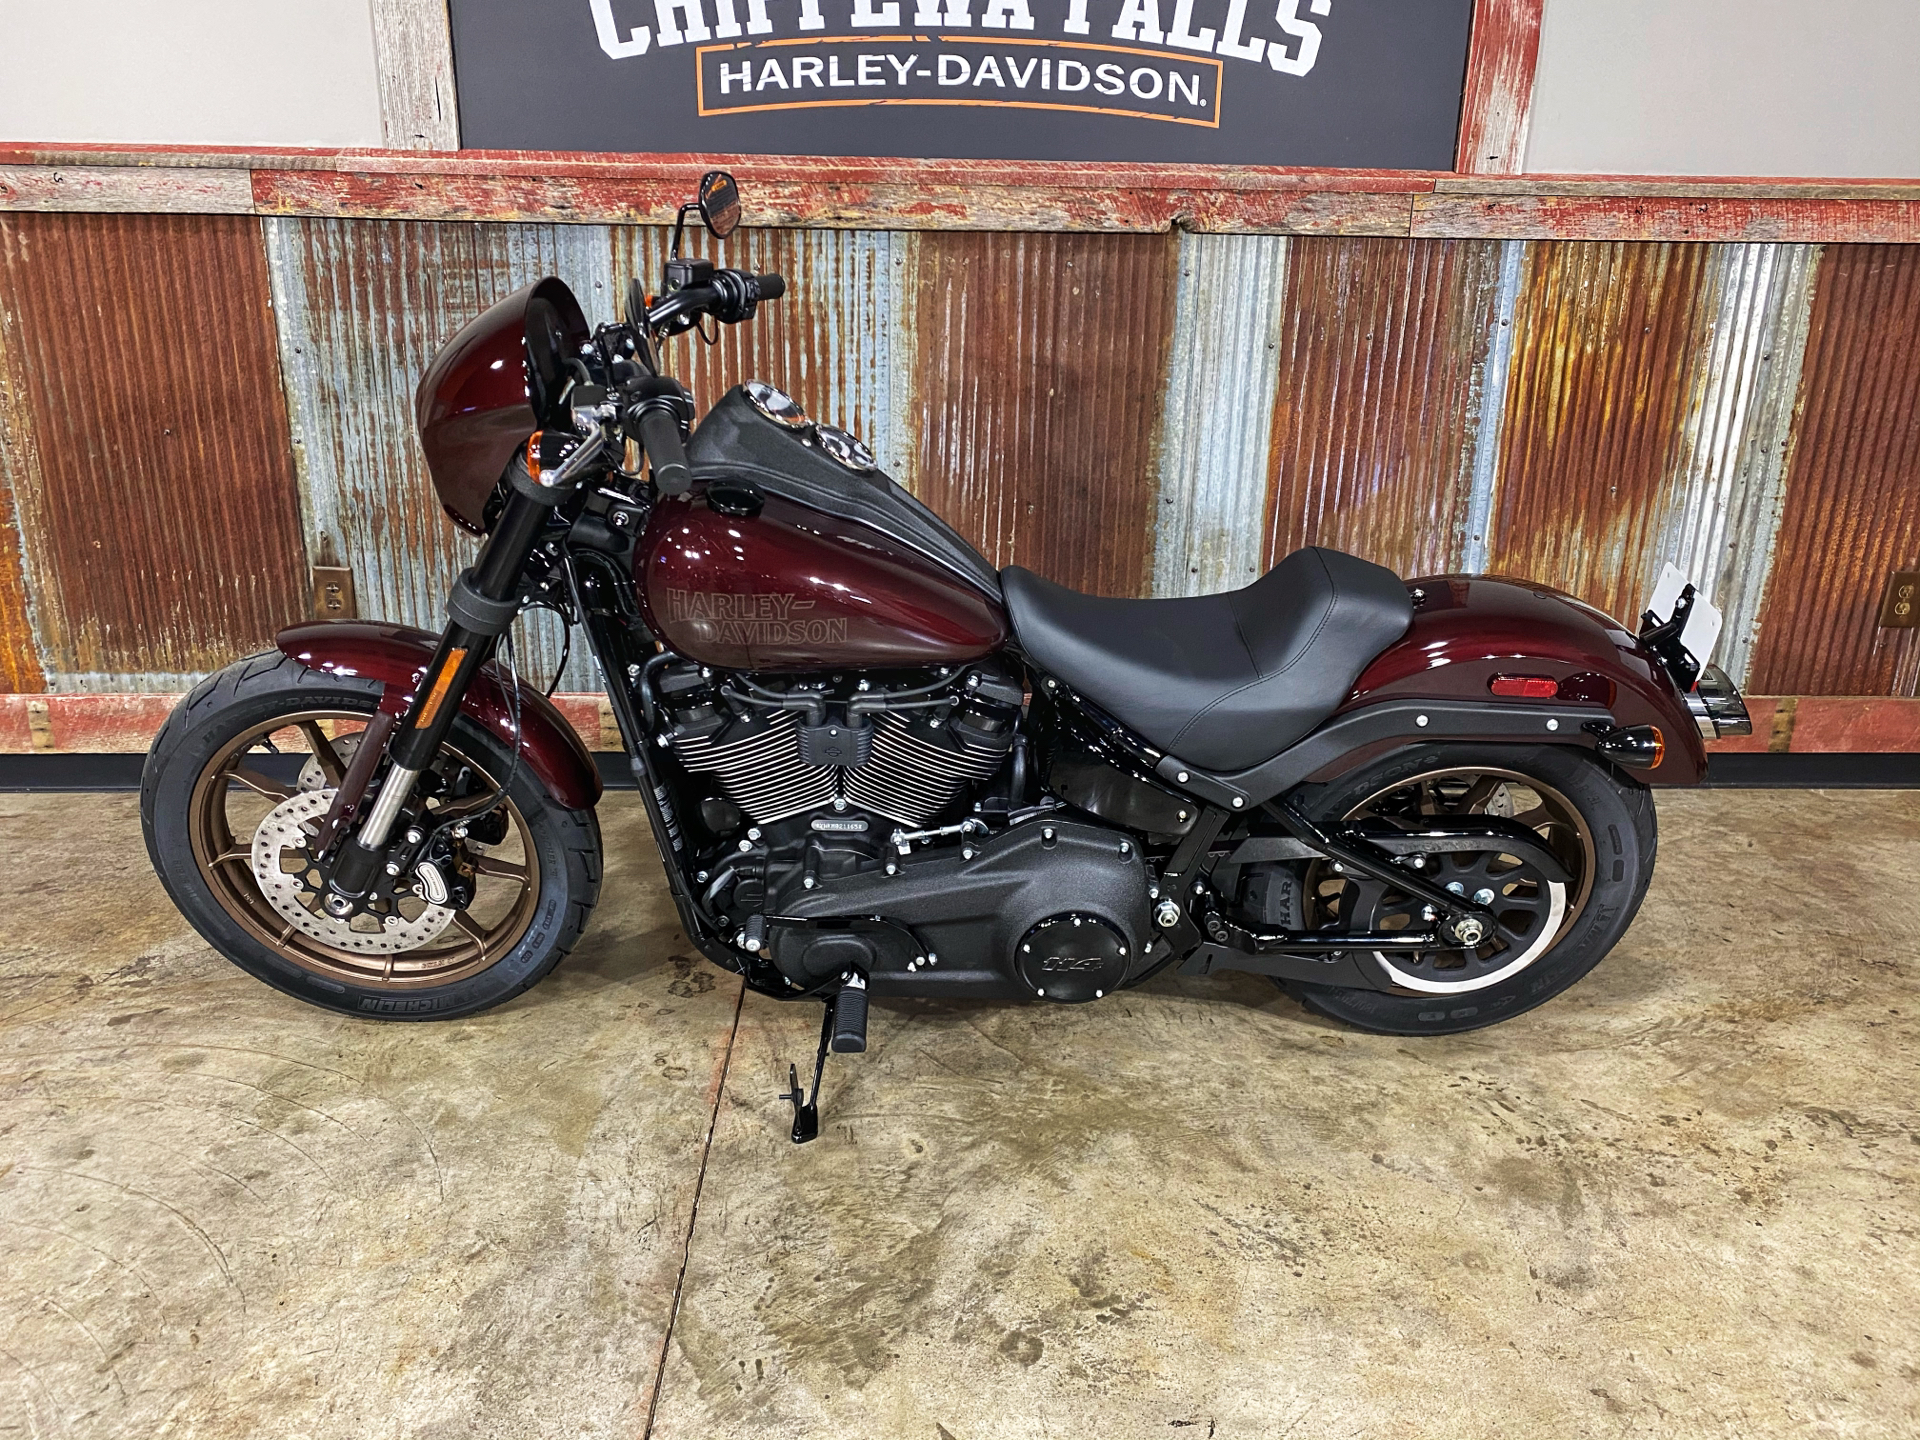 New 2021 Harley Davidson Low Rider S Midnight Crimson Motorcycles In Chippewa Falls Wi Fx021165